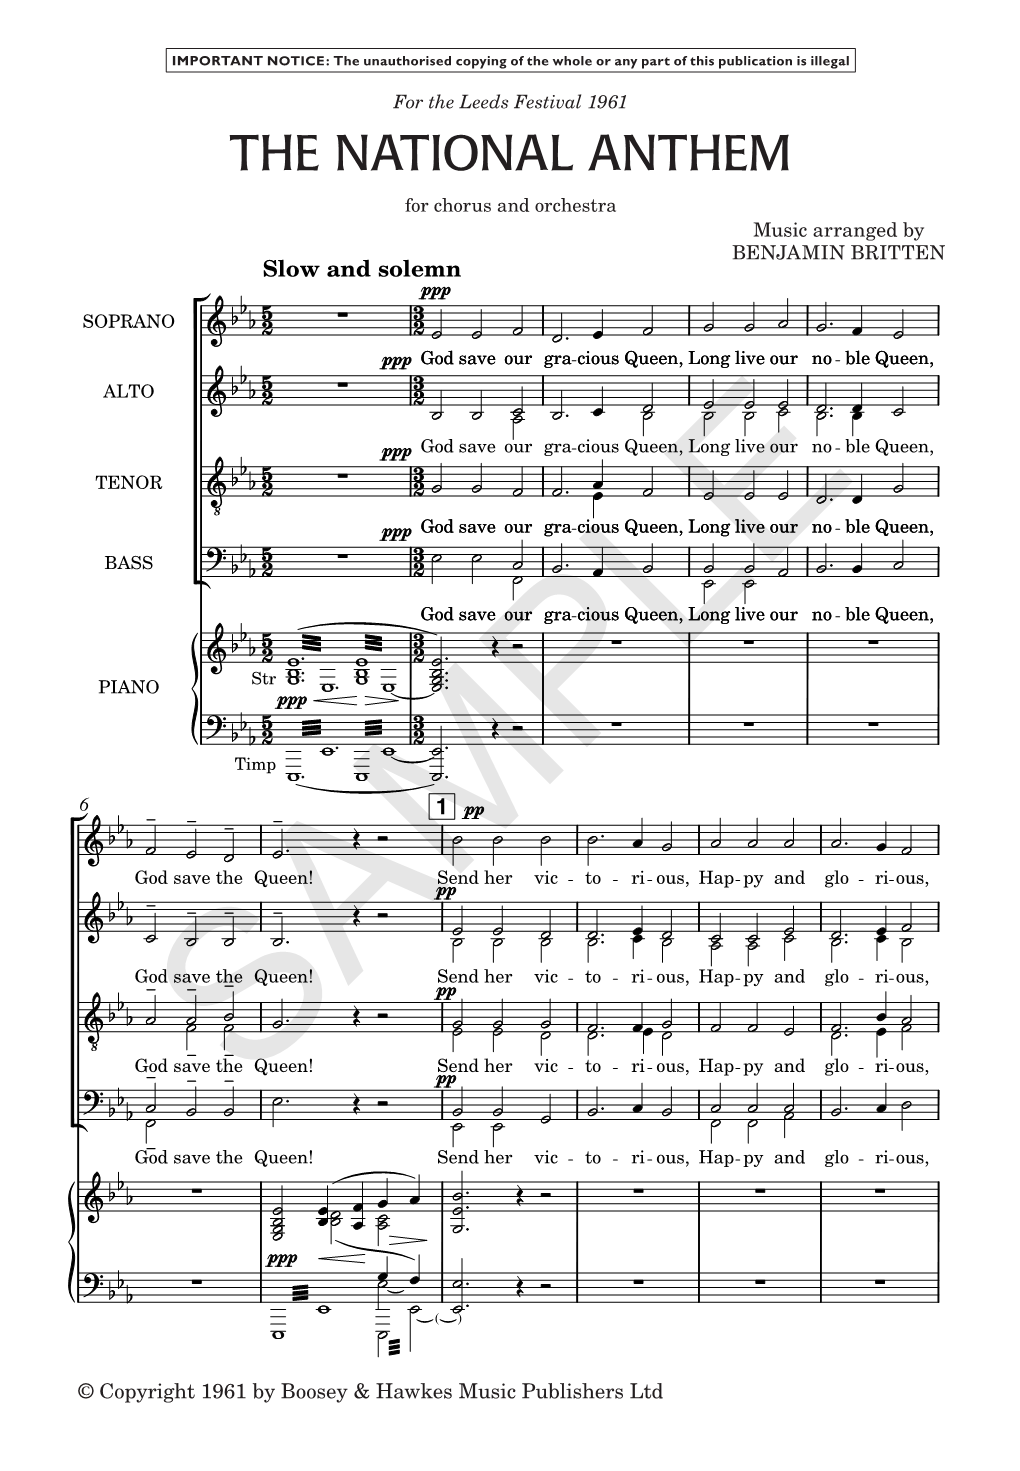 THE NATIONAL ANTHEM for Chorus and Orchestra Music Arranged by BENJAMIN BRITTEN Slow and Solemn